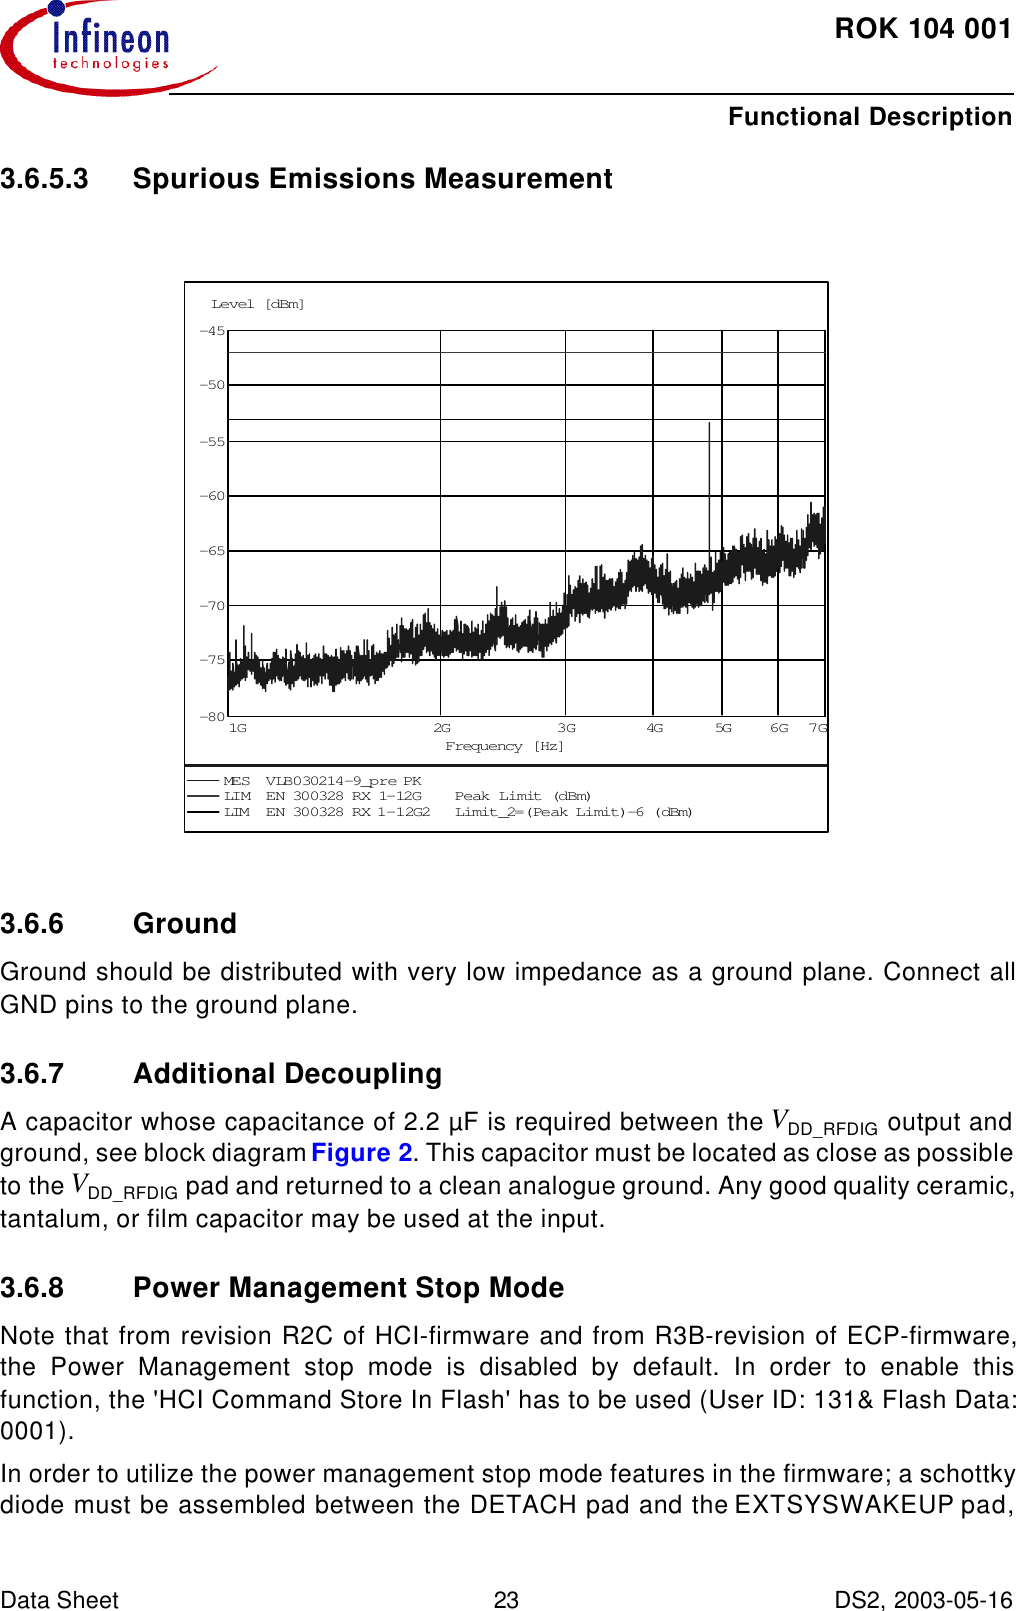 ROK104001Functional Description Data Sheet 23 DS2, 2003-05-16  3.6.5.3 Spurious Emissions Measurement3.6.6 GroundGround should be distributed with very low impedance as a ground plane. Connect allGND pins to the ground plane.3.6.7 Additional DecouplingA capacitor whose capacitance of 2.2 µF is required between the VDD_RFDIG output andground, see block diagram Figure2. This capacitor must be located as close as possibleto the VDD_RFDIG pad and returned to a clean analogue ground. Any good quality ceramic,tantalum, or film capacitor may be used at the input.3.6.8 Power Management Stop ModeNote that from revision R2C of HCI-firmware and from R3B-revision of ECP-firmware,the Power Management stop mode is disabled by default. In order to enable thisfunction, the &apos;HCI Command Store In Flash&apos; has to be used (User ID: 131&amp; Flash Data:0001). In order to utilize the power management stop mode features in the firmware; a schottkydiode must be assembled between the DETACH pad and the EXTSYSWAKEUP pad,-80-75-70-65-60-55-50-45Level [dBm]1G 2G 3G 4G 5G 6G 7GFrequency [Hz]MES VLB030214-9_pre PKLIM EN 300328 RX 1-12G Peak Limit (dBm)LIM EN 300328 RX 1-12G2 Limit_2=(Peak Limit)-6 (dBm)